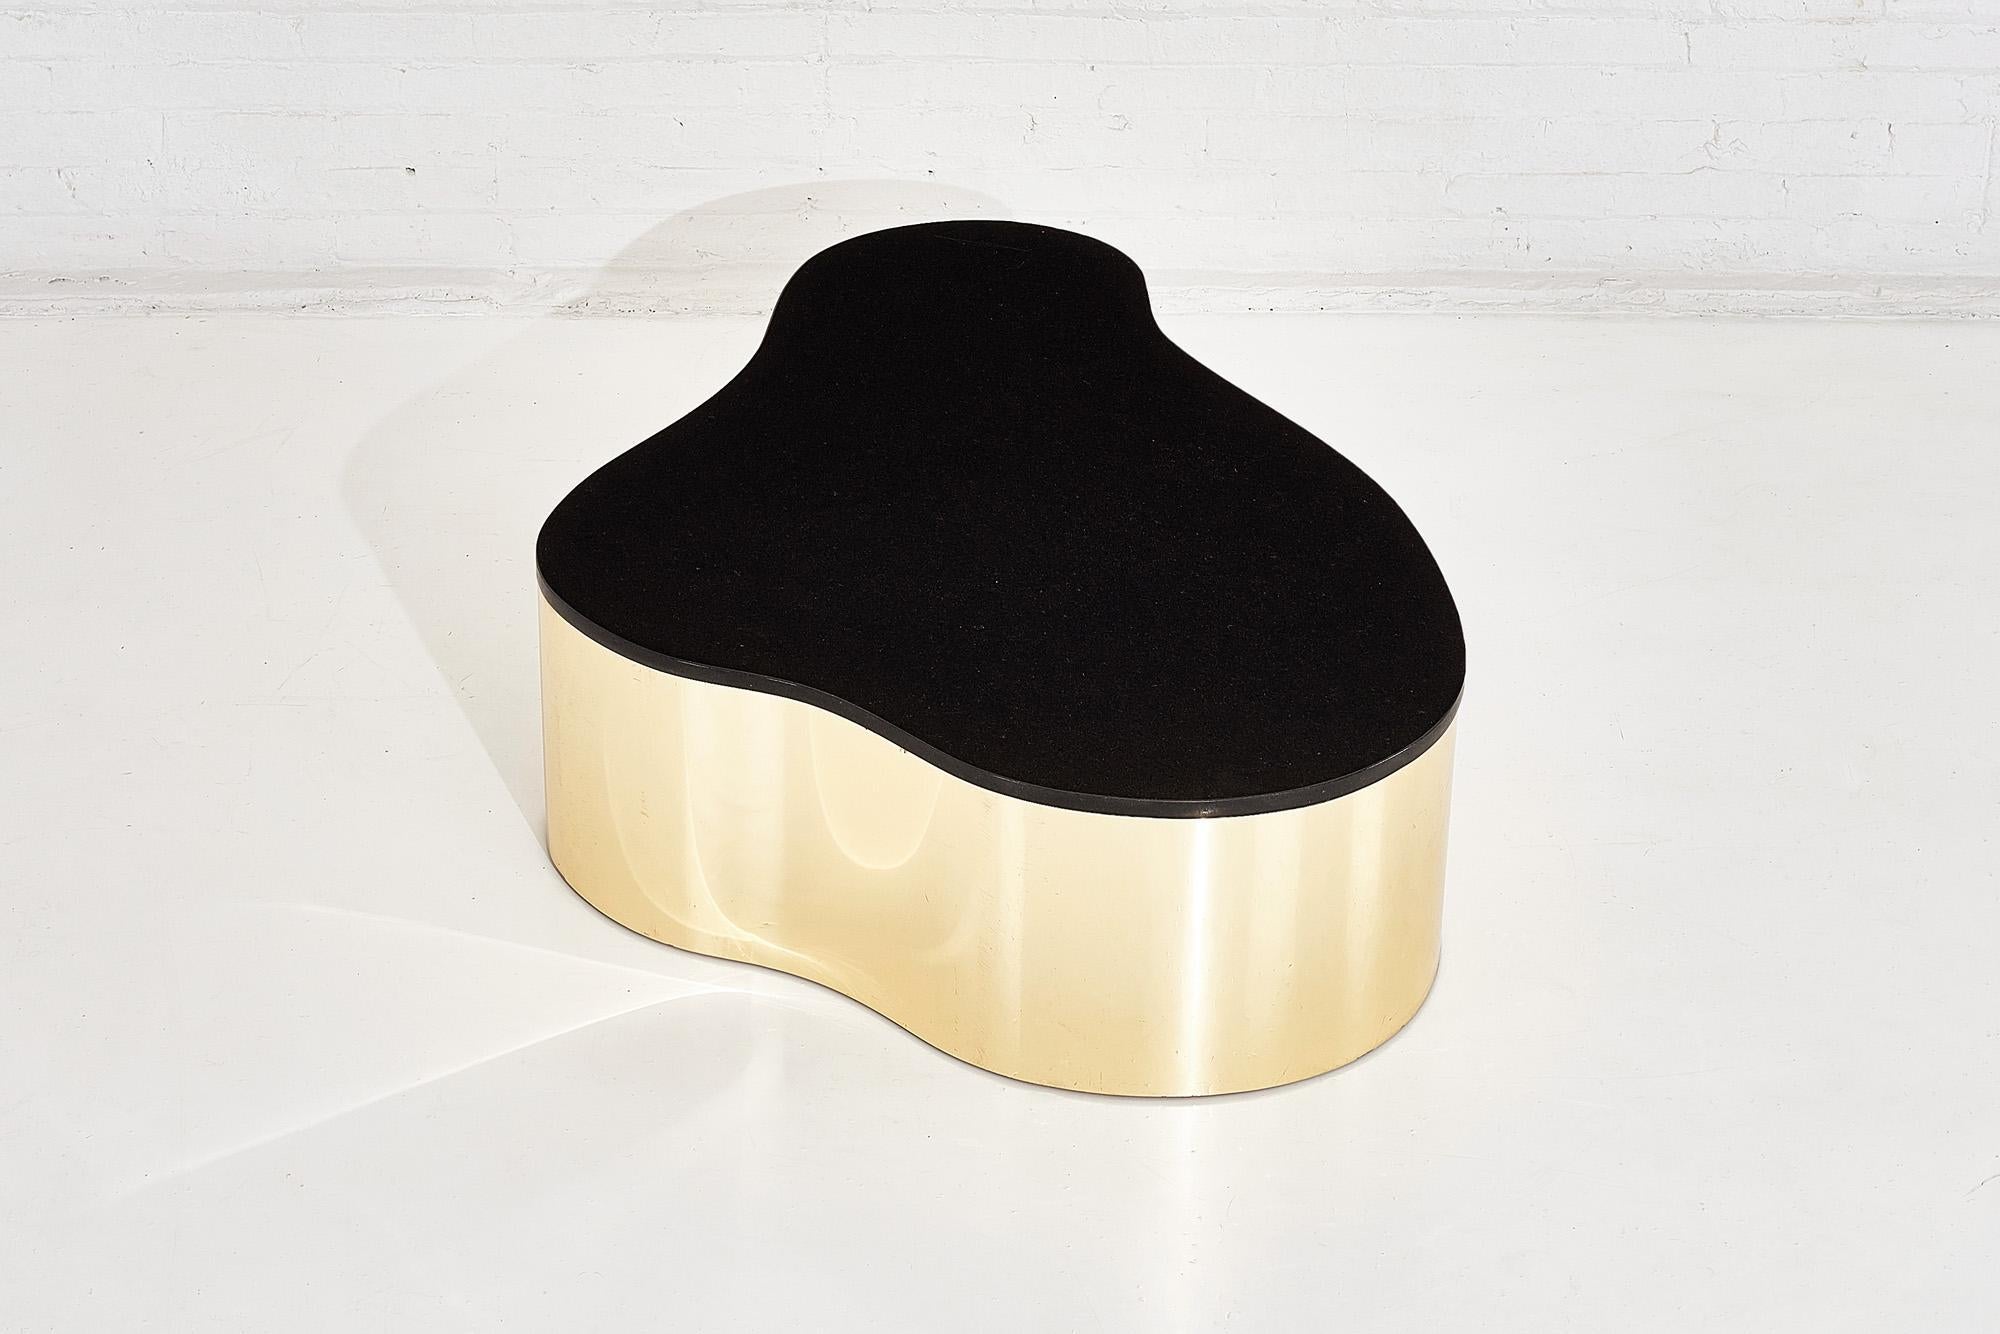 Black granite and brass biomorphic coffee table in style of Karl Springer, circa 1980s.